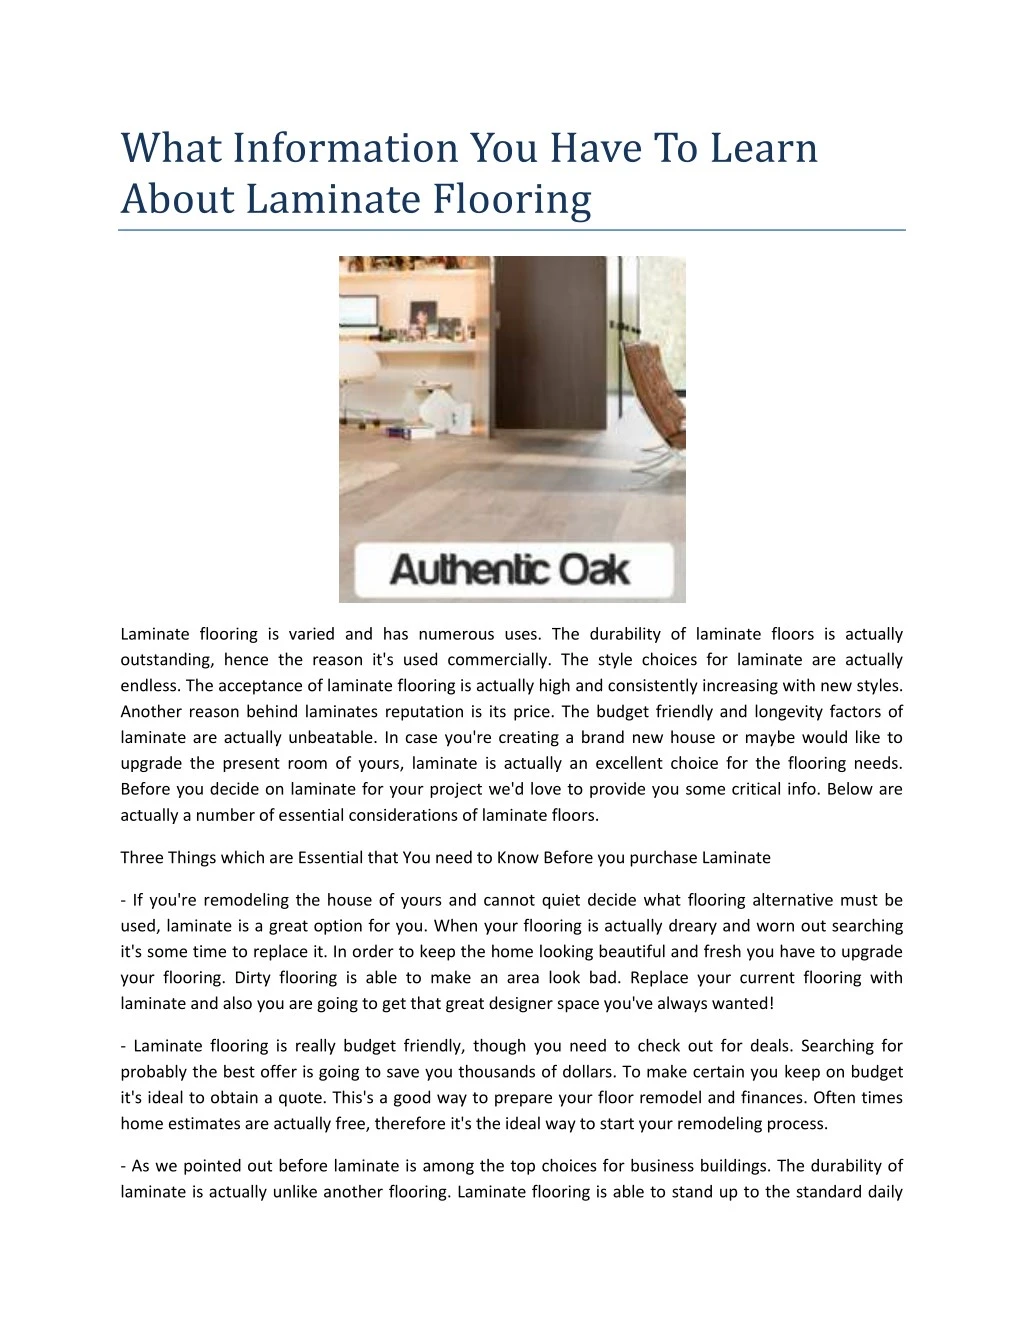 what information you have to learn about laminate